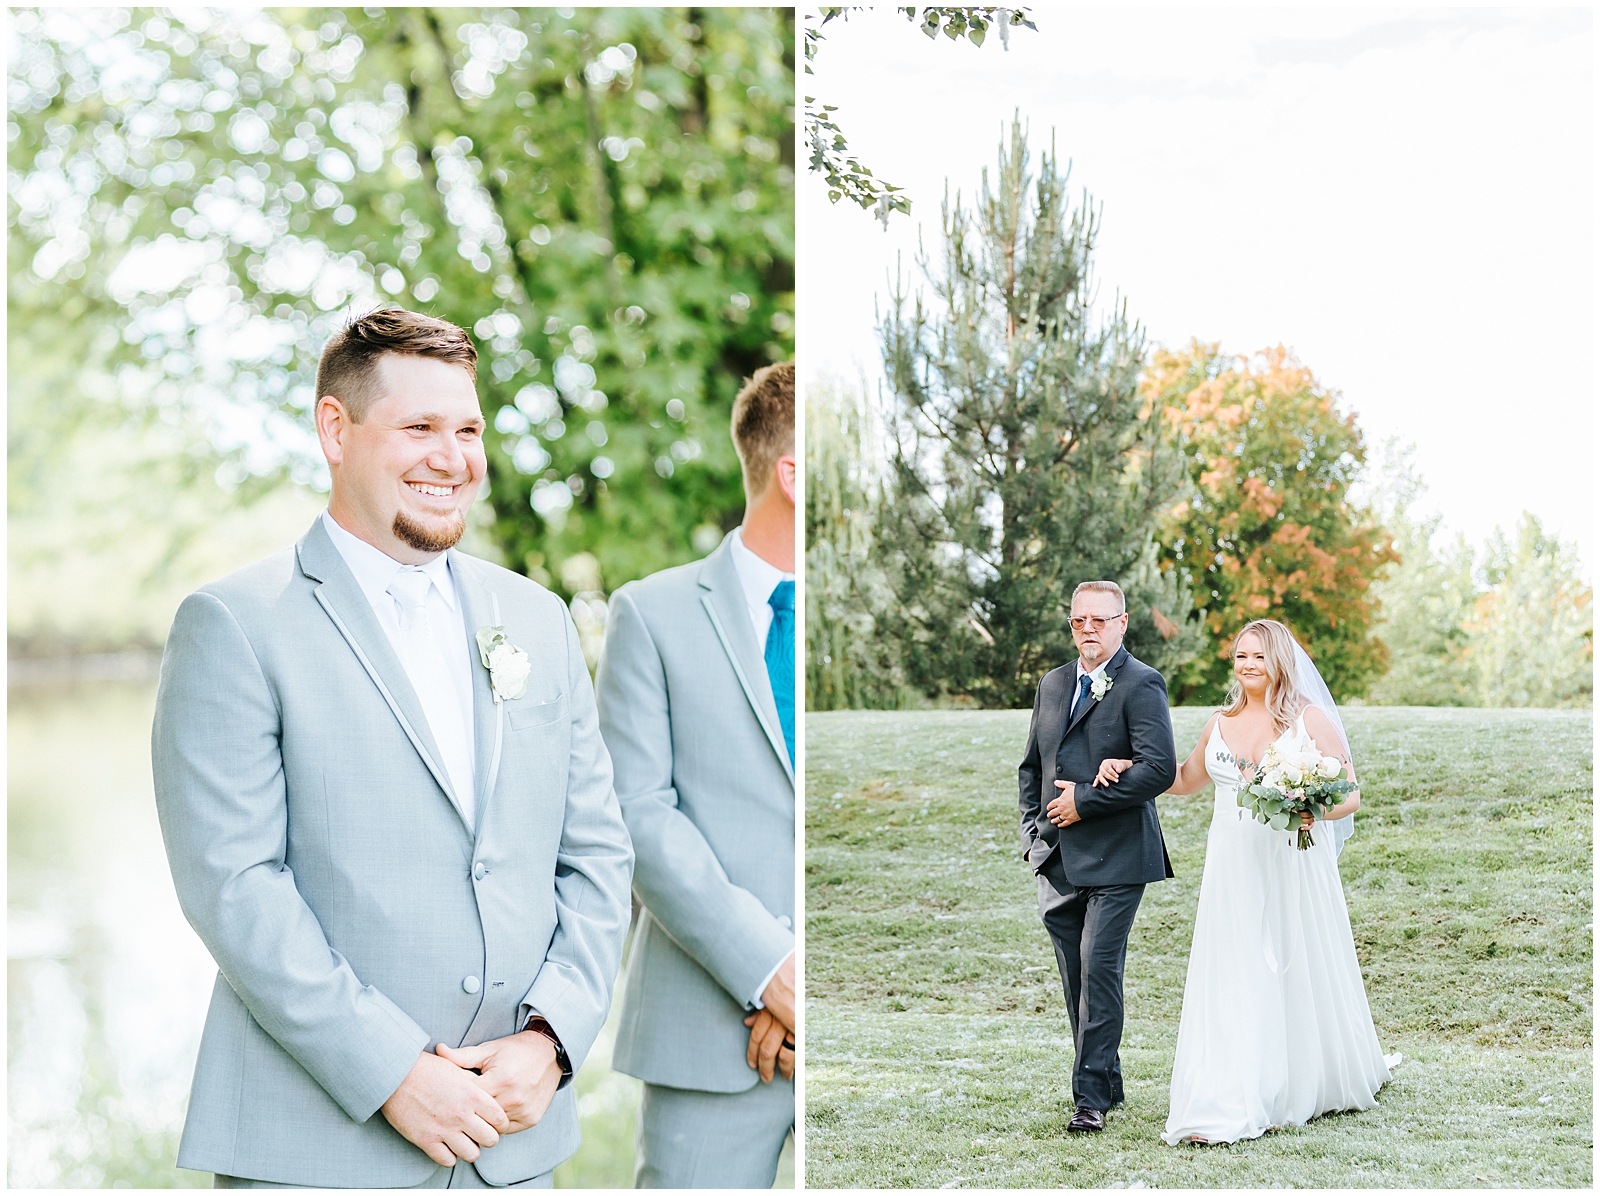 Groom Smiling as his bride comes down the aisle at White Willow Estate Wedding